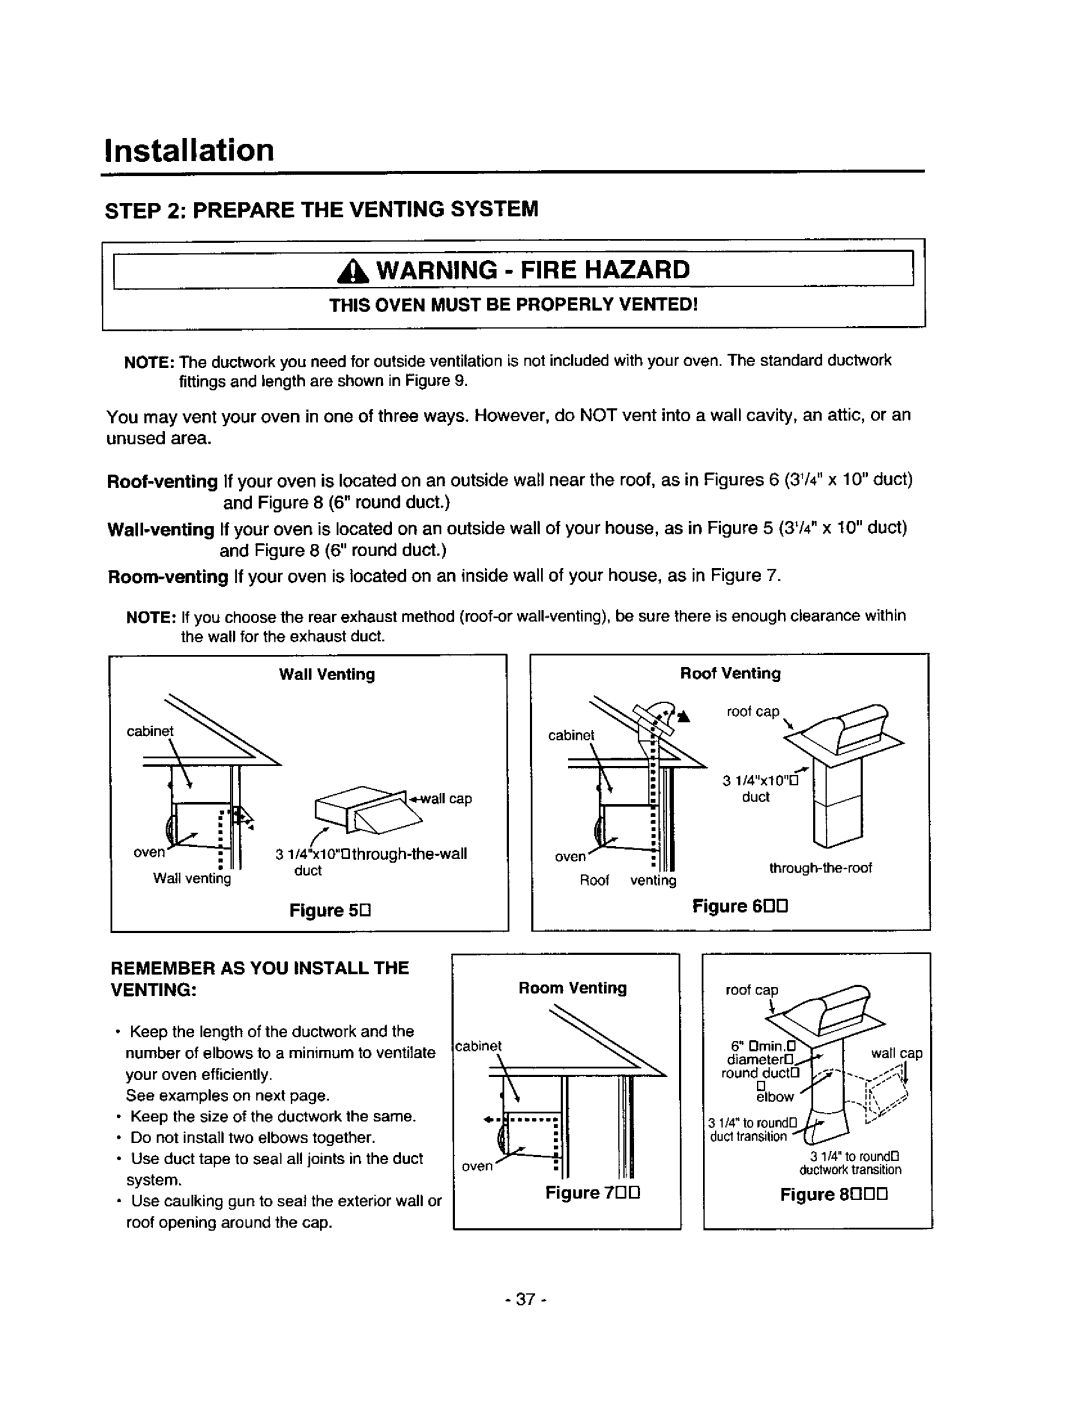 Amana MVH250W Prepare The Venting System, D Remember As You Install The Venting, Odd, THIS WARNING-nRE.AzARo, Installation 